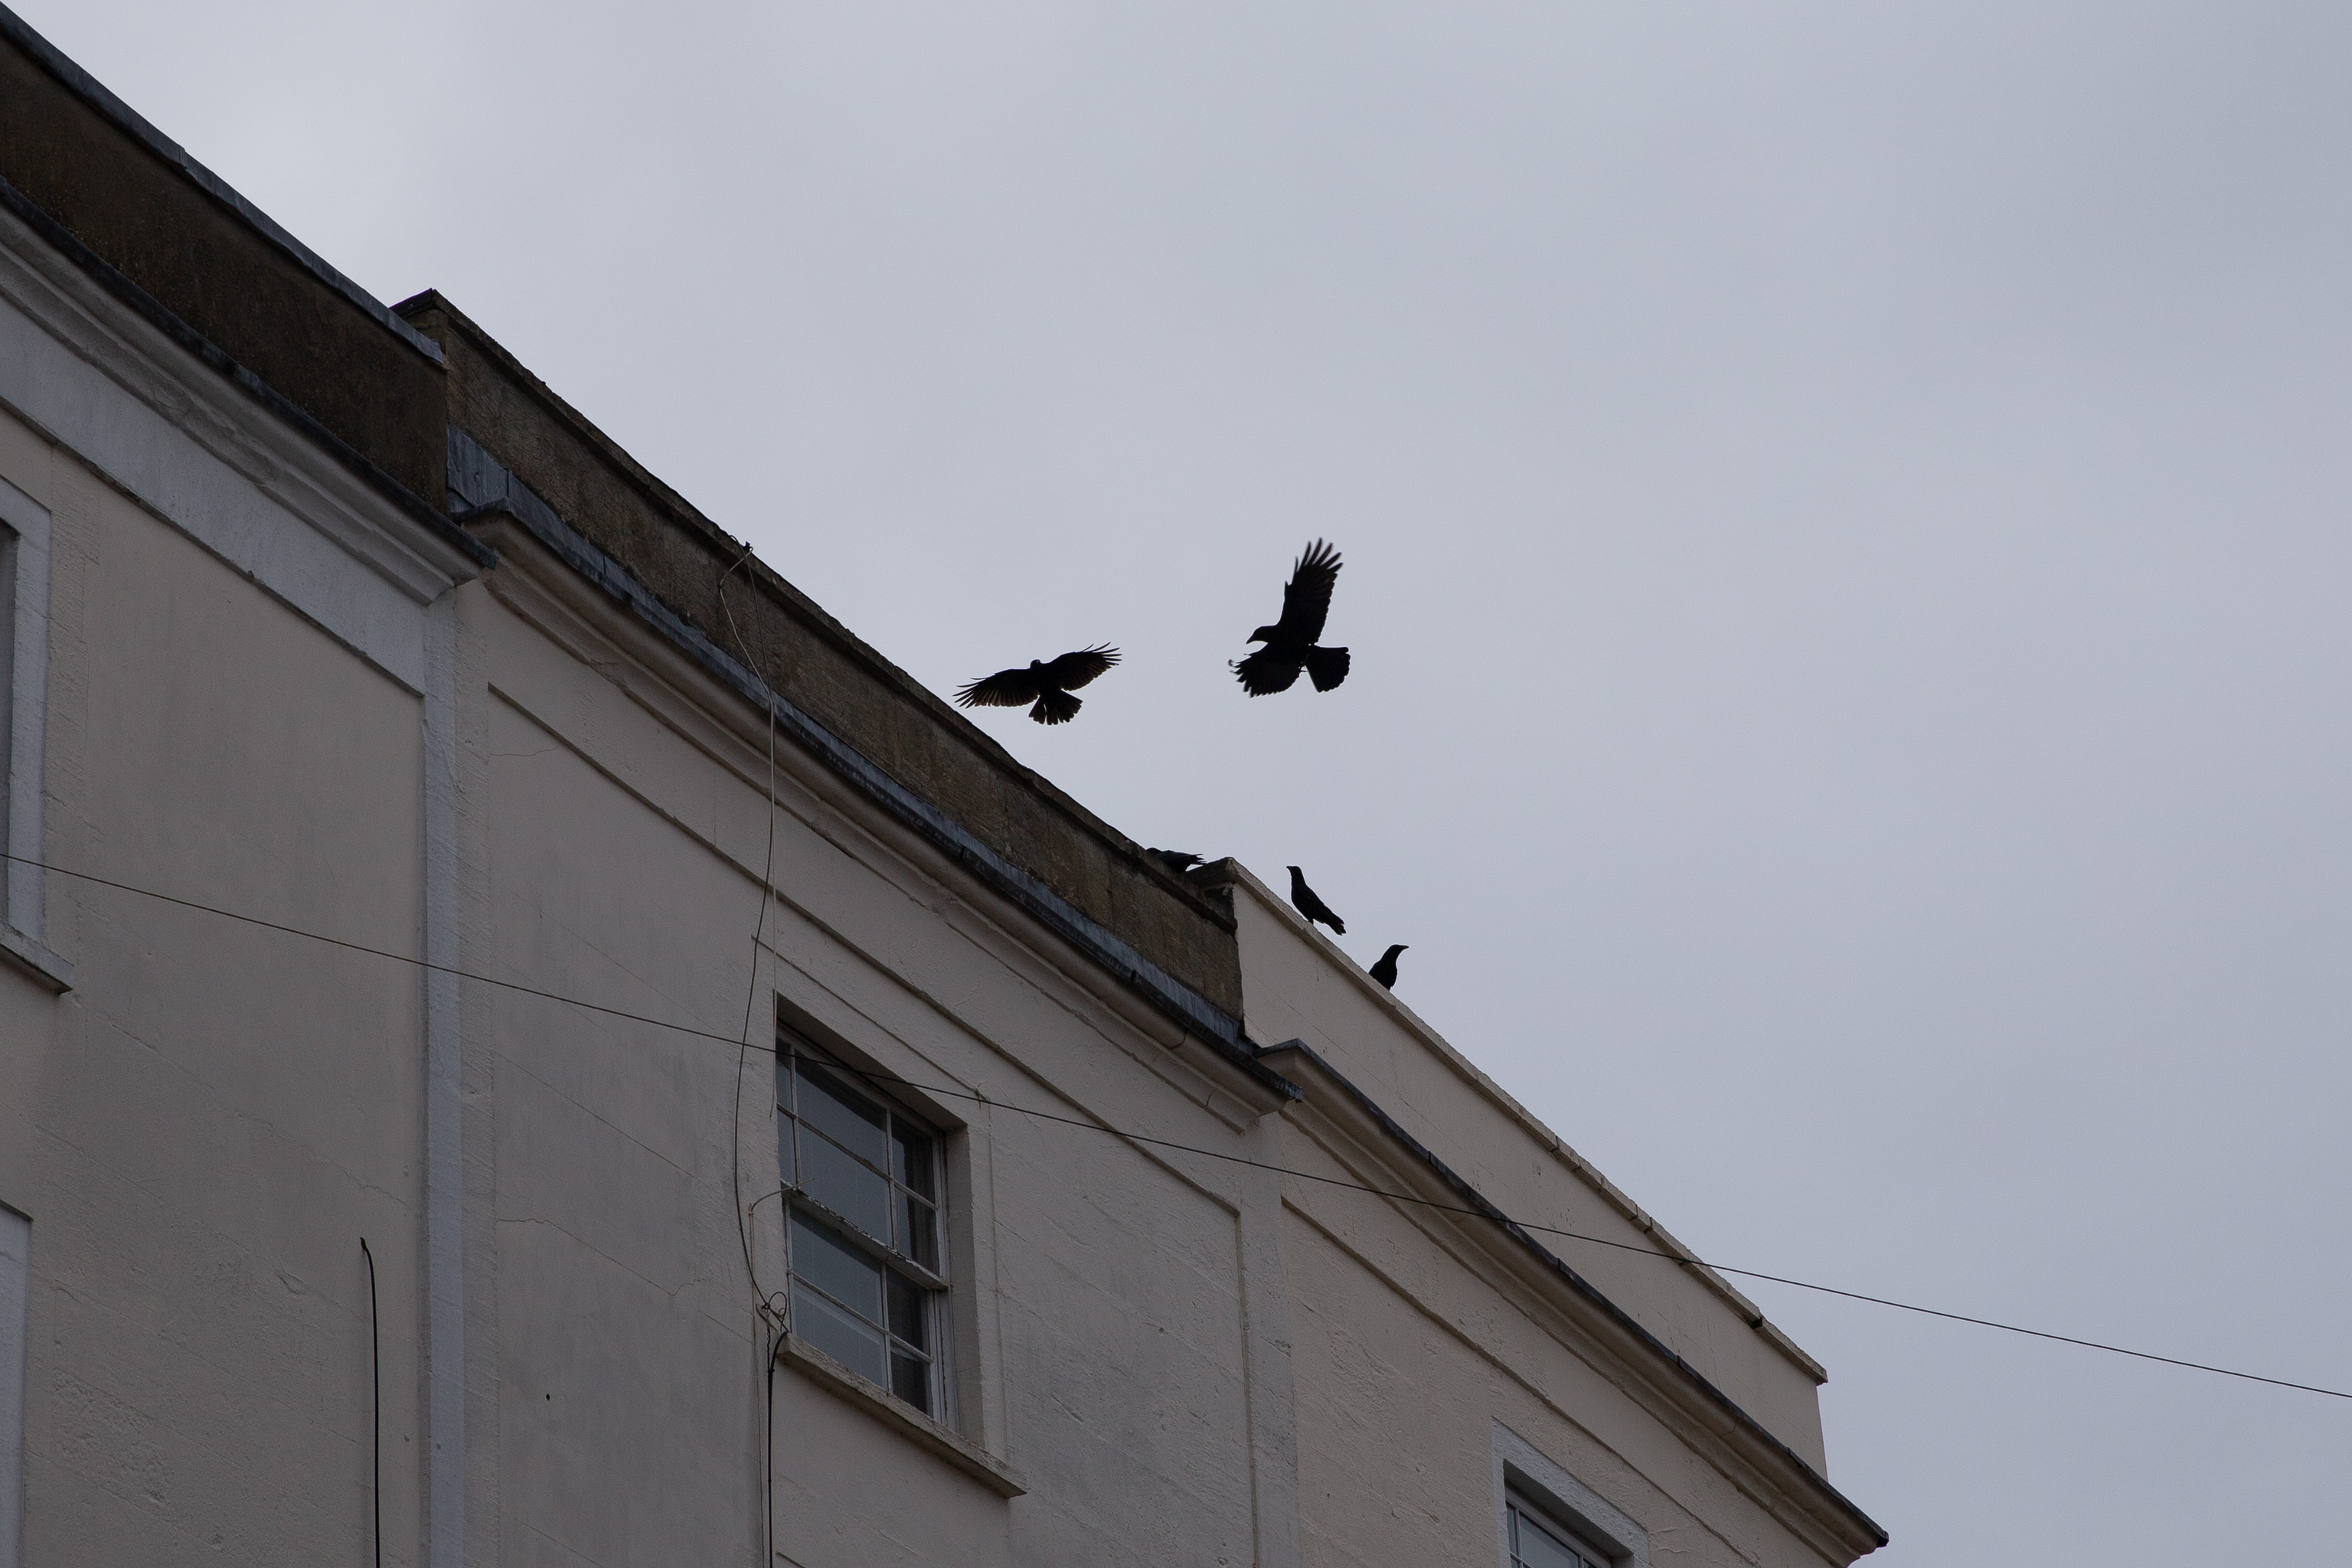 A Murder of Crows
It really did sound like a murder, too. I think someone in the attic must've popped some food out, because there was a sudden furious furore from t...